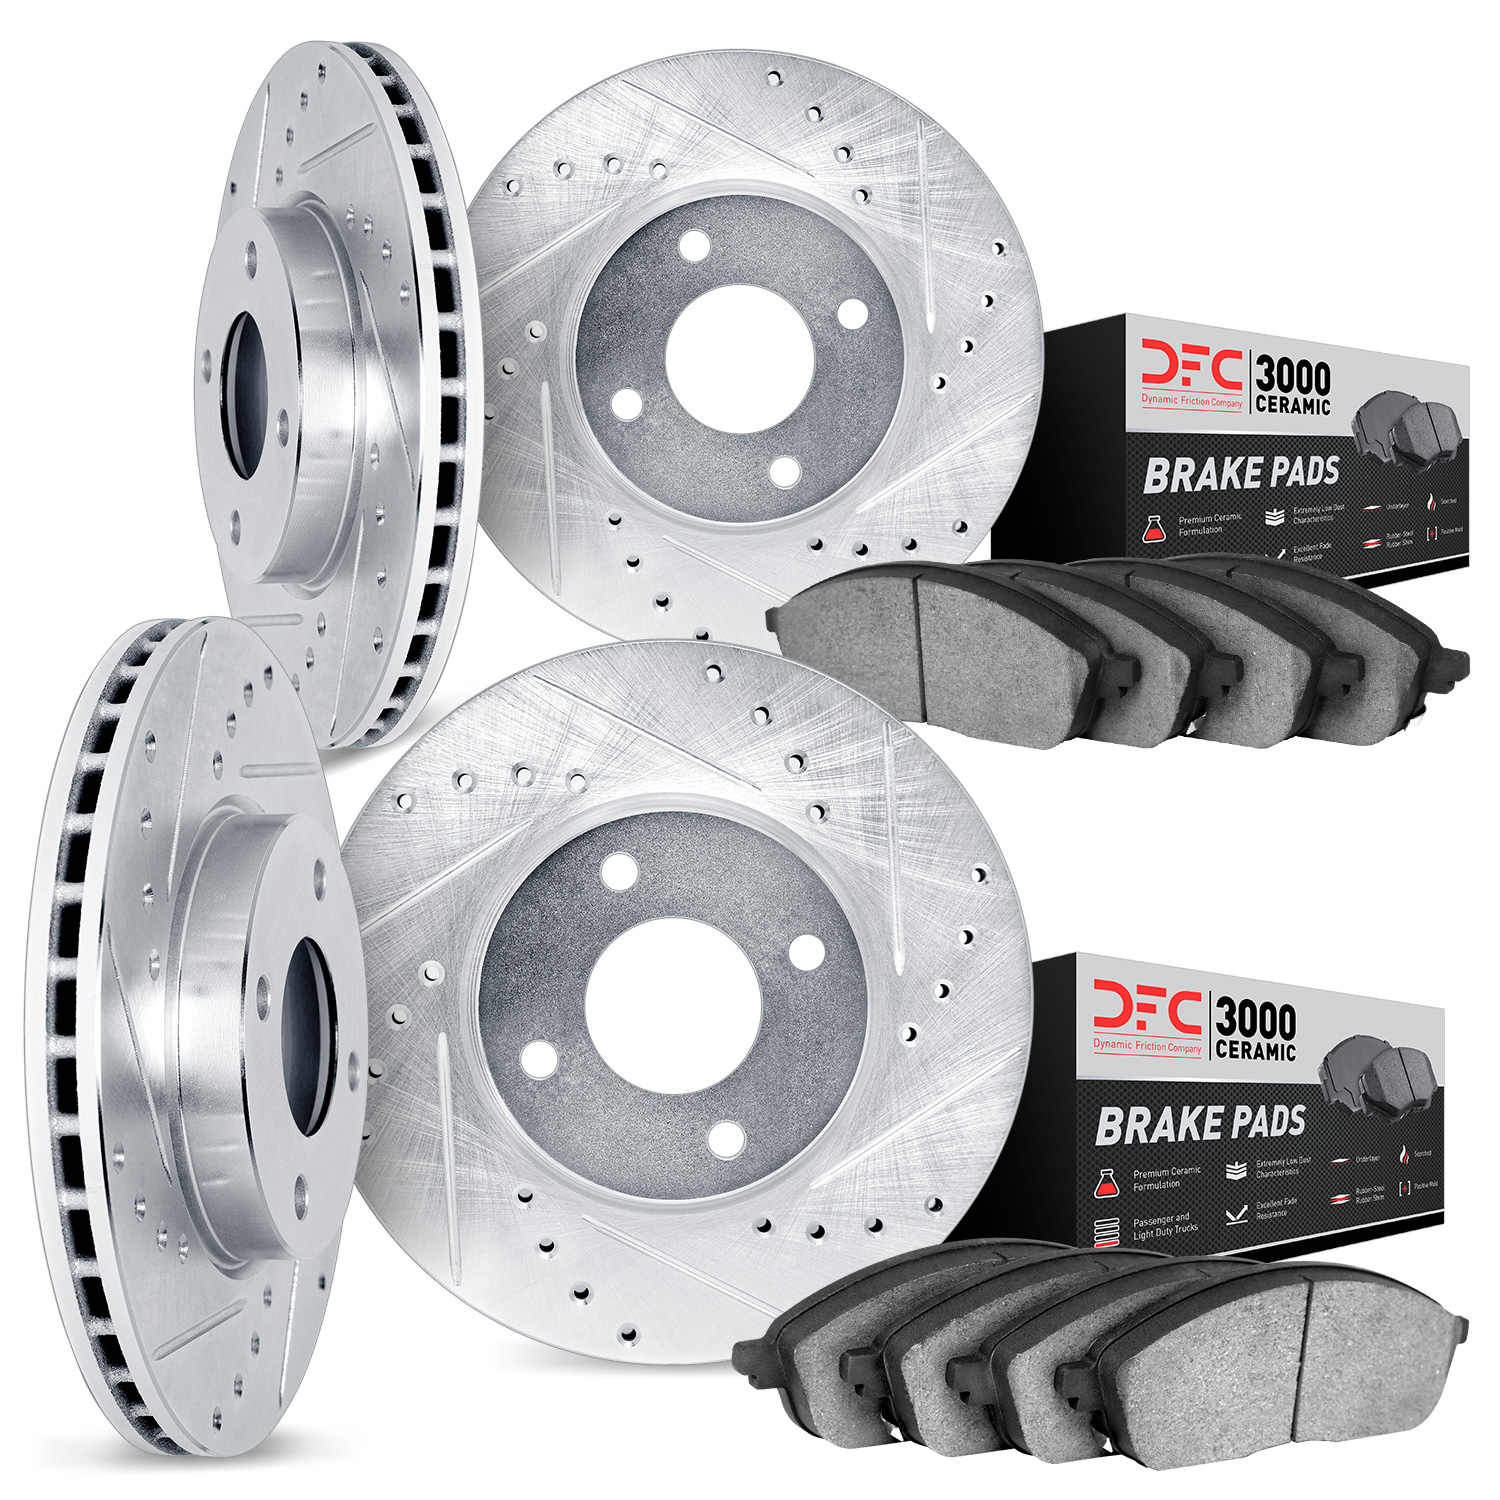 7304-56009 Drilled/Slotted Brake Rotor with 3000-Series Ceramic Brake Pads Kit [Silver], 1995-2000 Ford/Lincoln/Mercury/Mazda, P